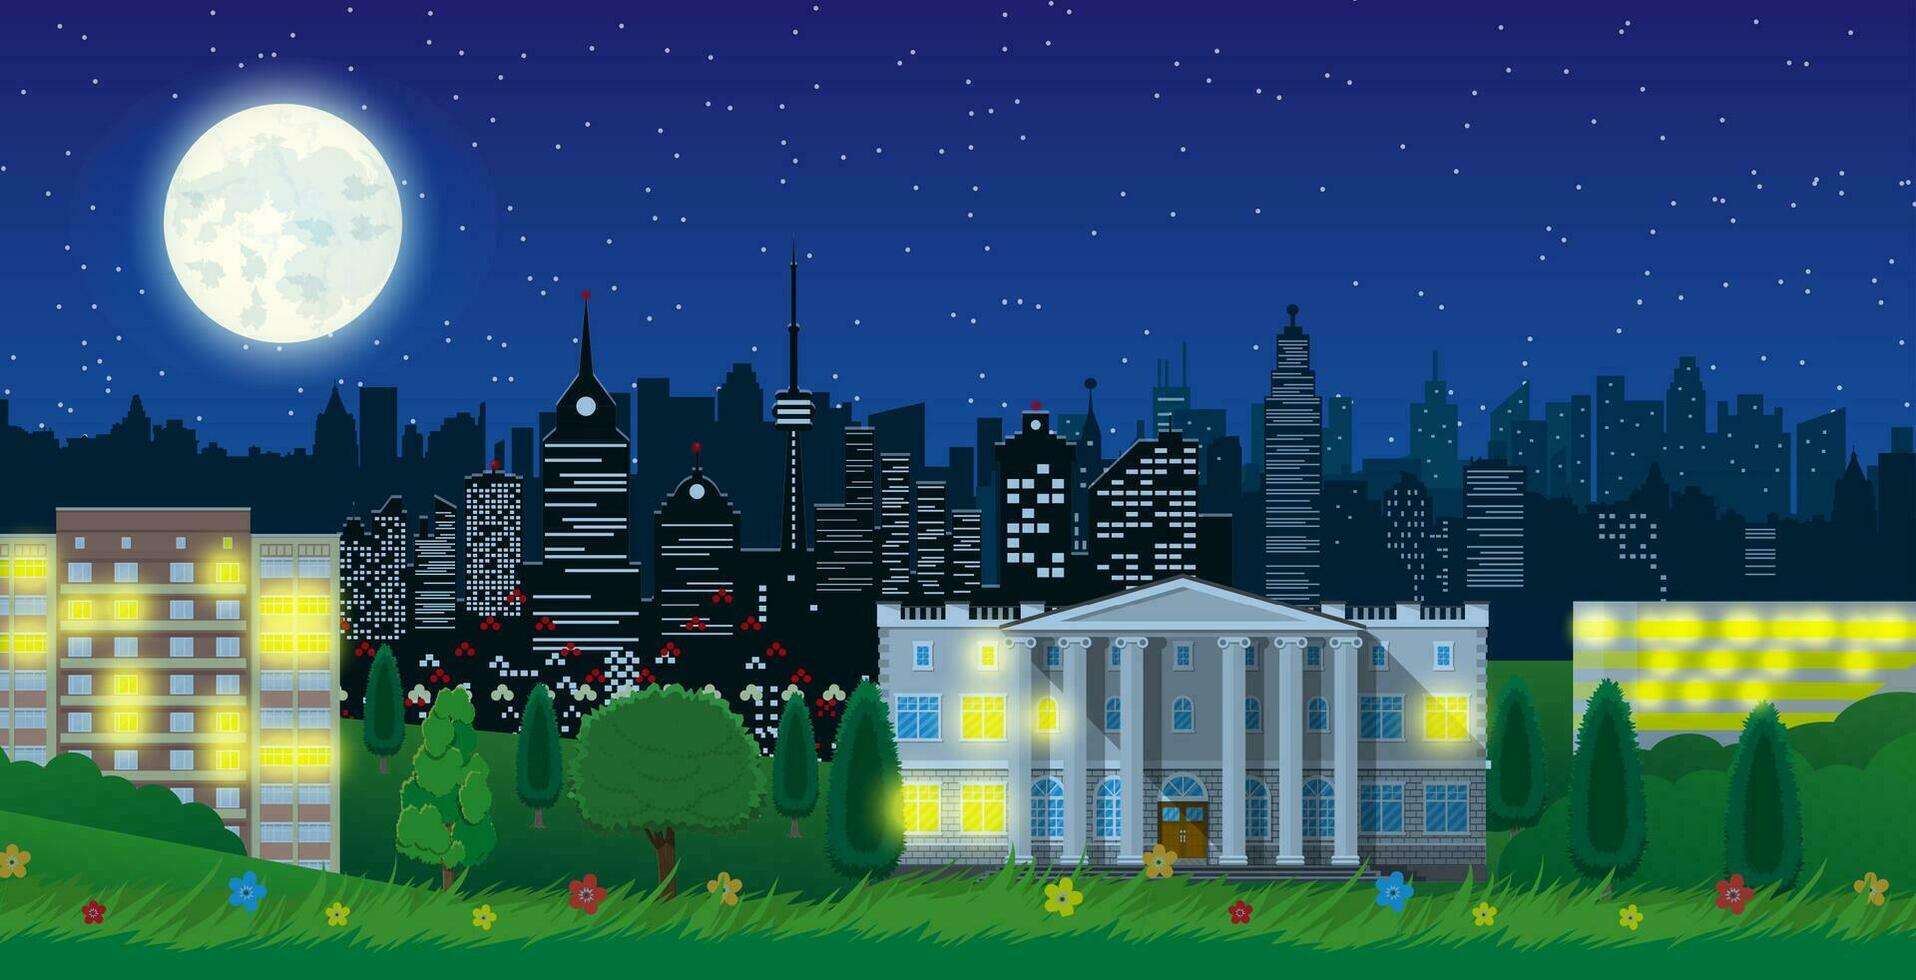 Modern city view in night. Cityscape with office and residental buildings, city park with trees and flowers, sky, moon and stars. Vector illustration in flat style